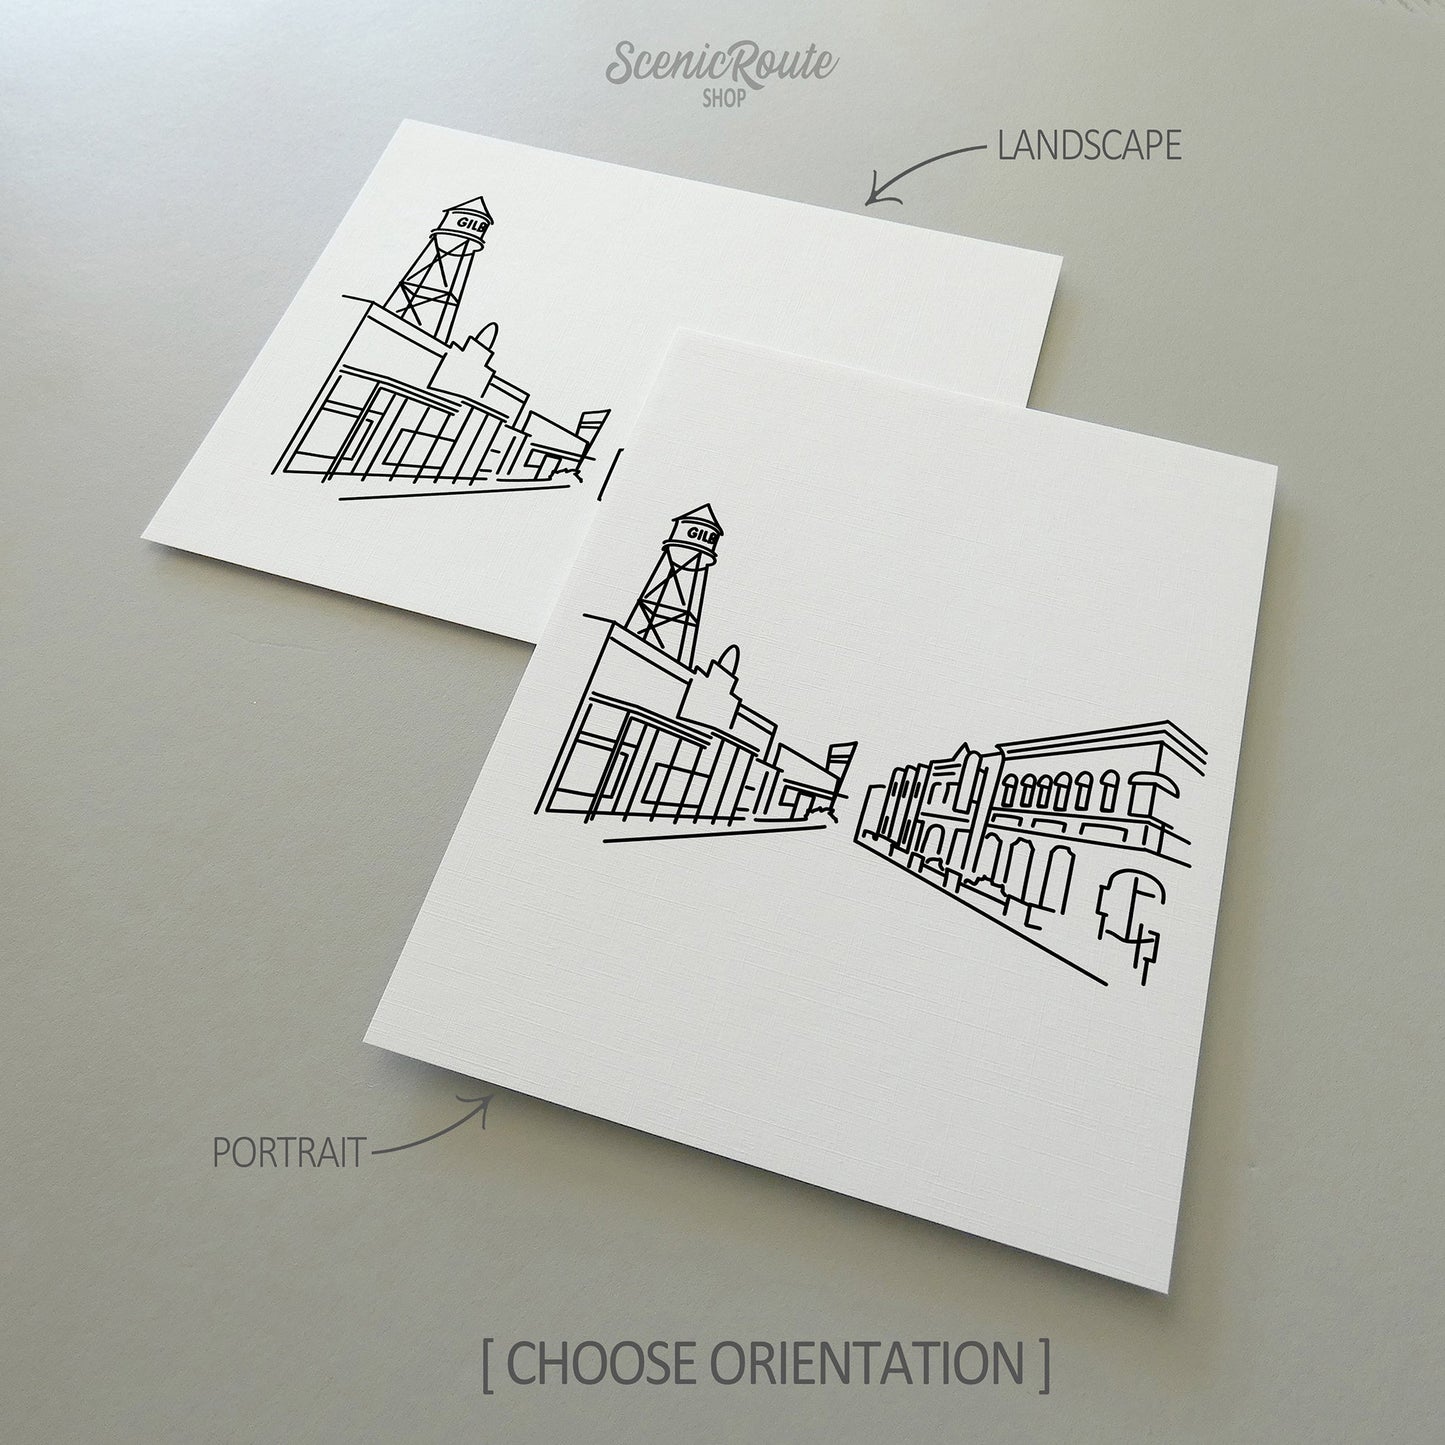 Two line art drawings of the Gilbert Skyline on white linen paper with a gray background.  The pieces are shown in portrait and landscape orientation for the available art print options.